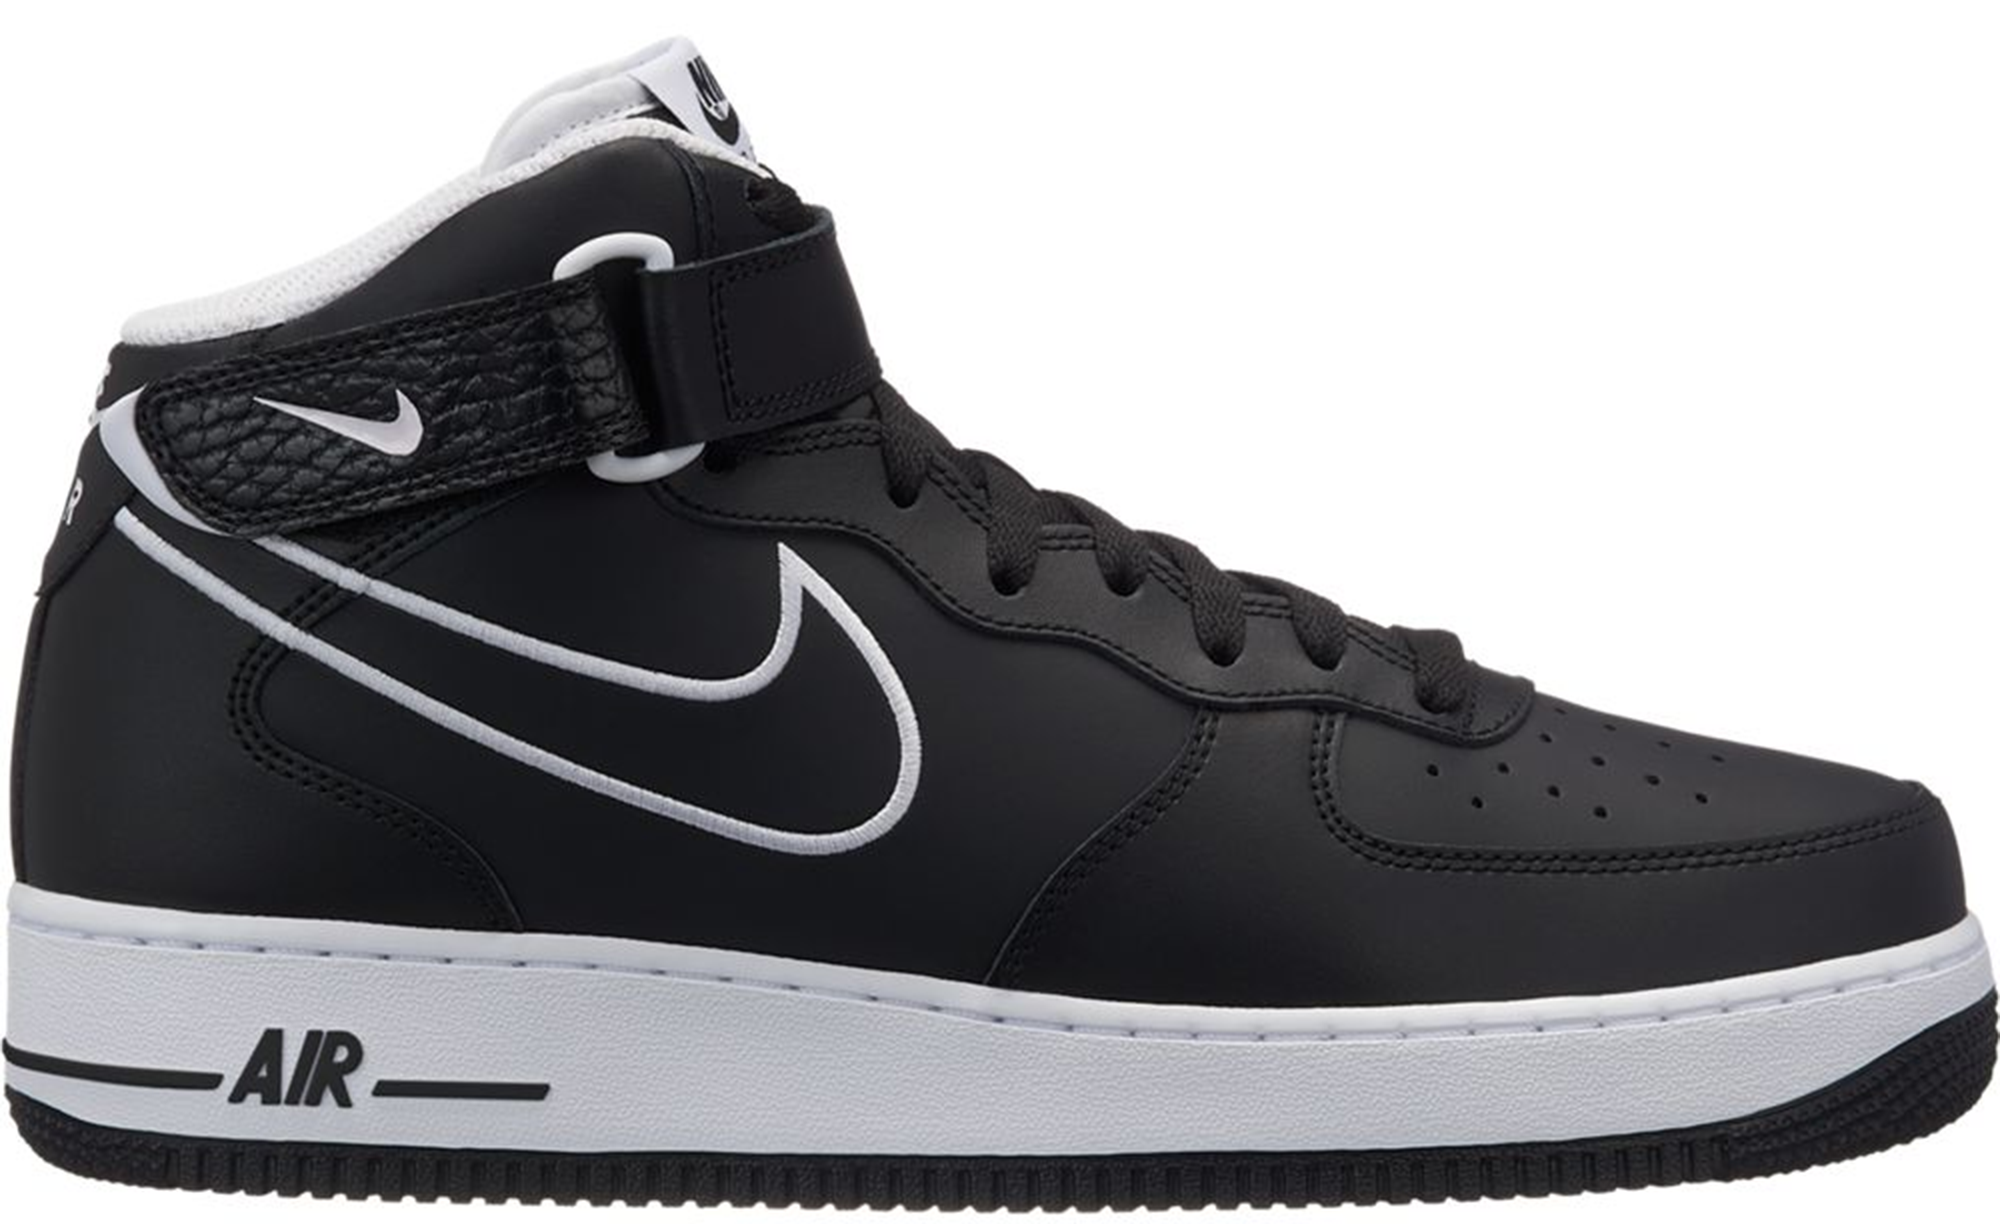 air force 1 black and white mid